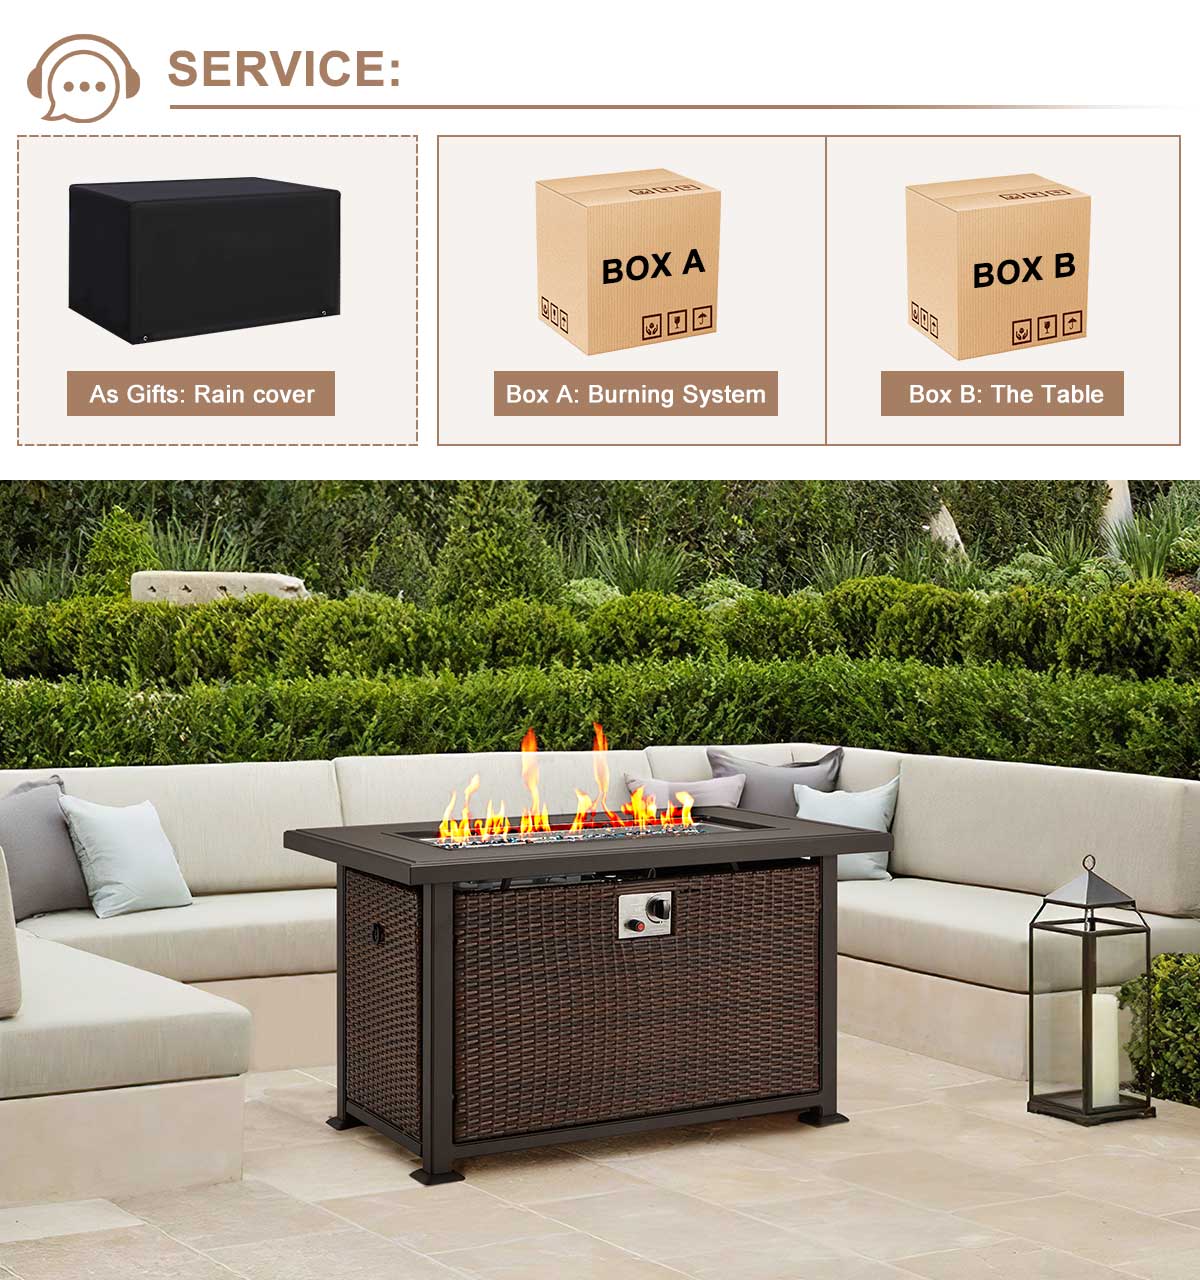 50 Inch Propane Fire Pit Table,50,000 BTU Gas Fire Pits with Aluminum Tabletop, Dark Brown